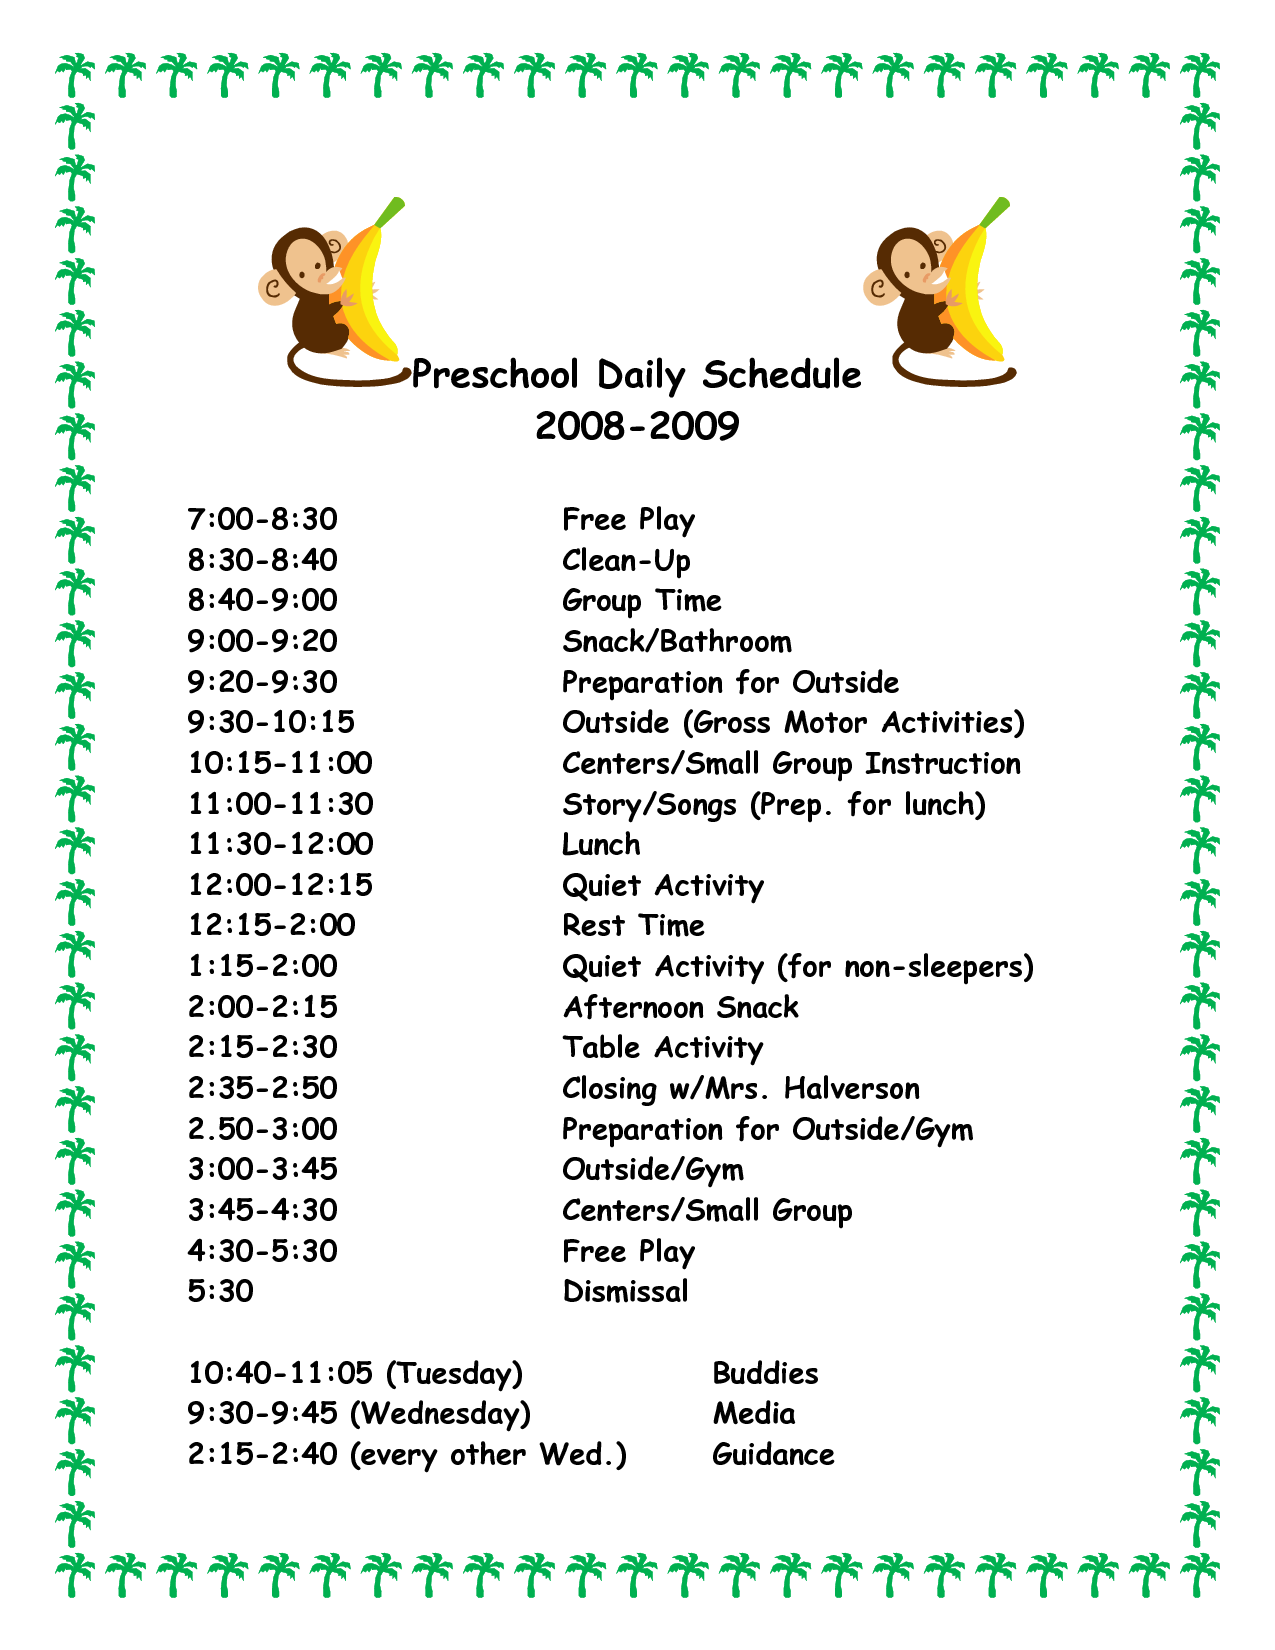 a-printable-schedule-for-the-preschool-daily-schedule-with-two-monkeys